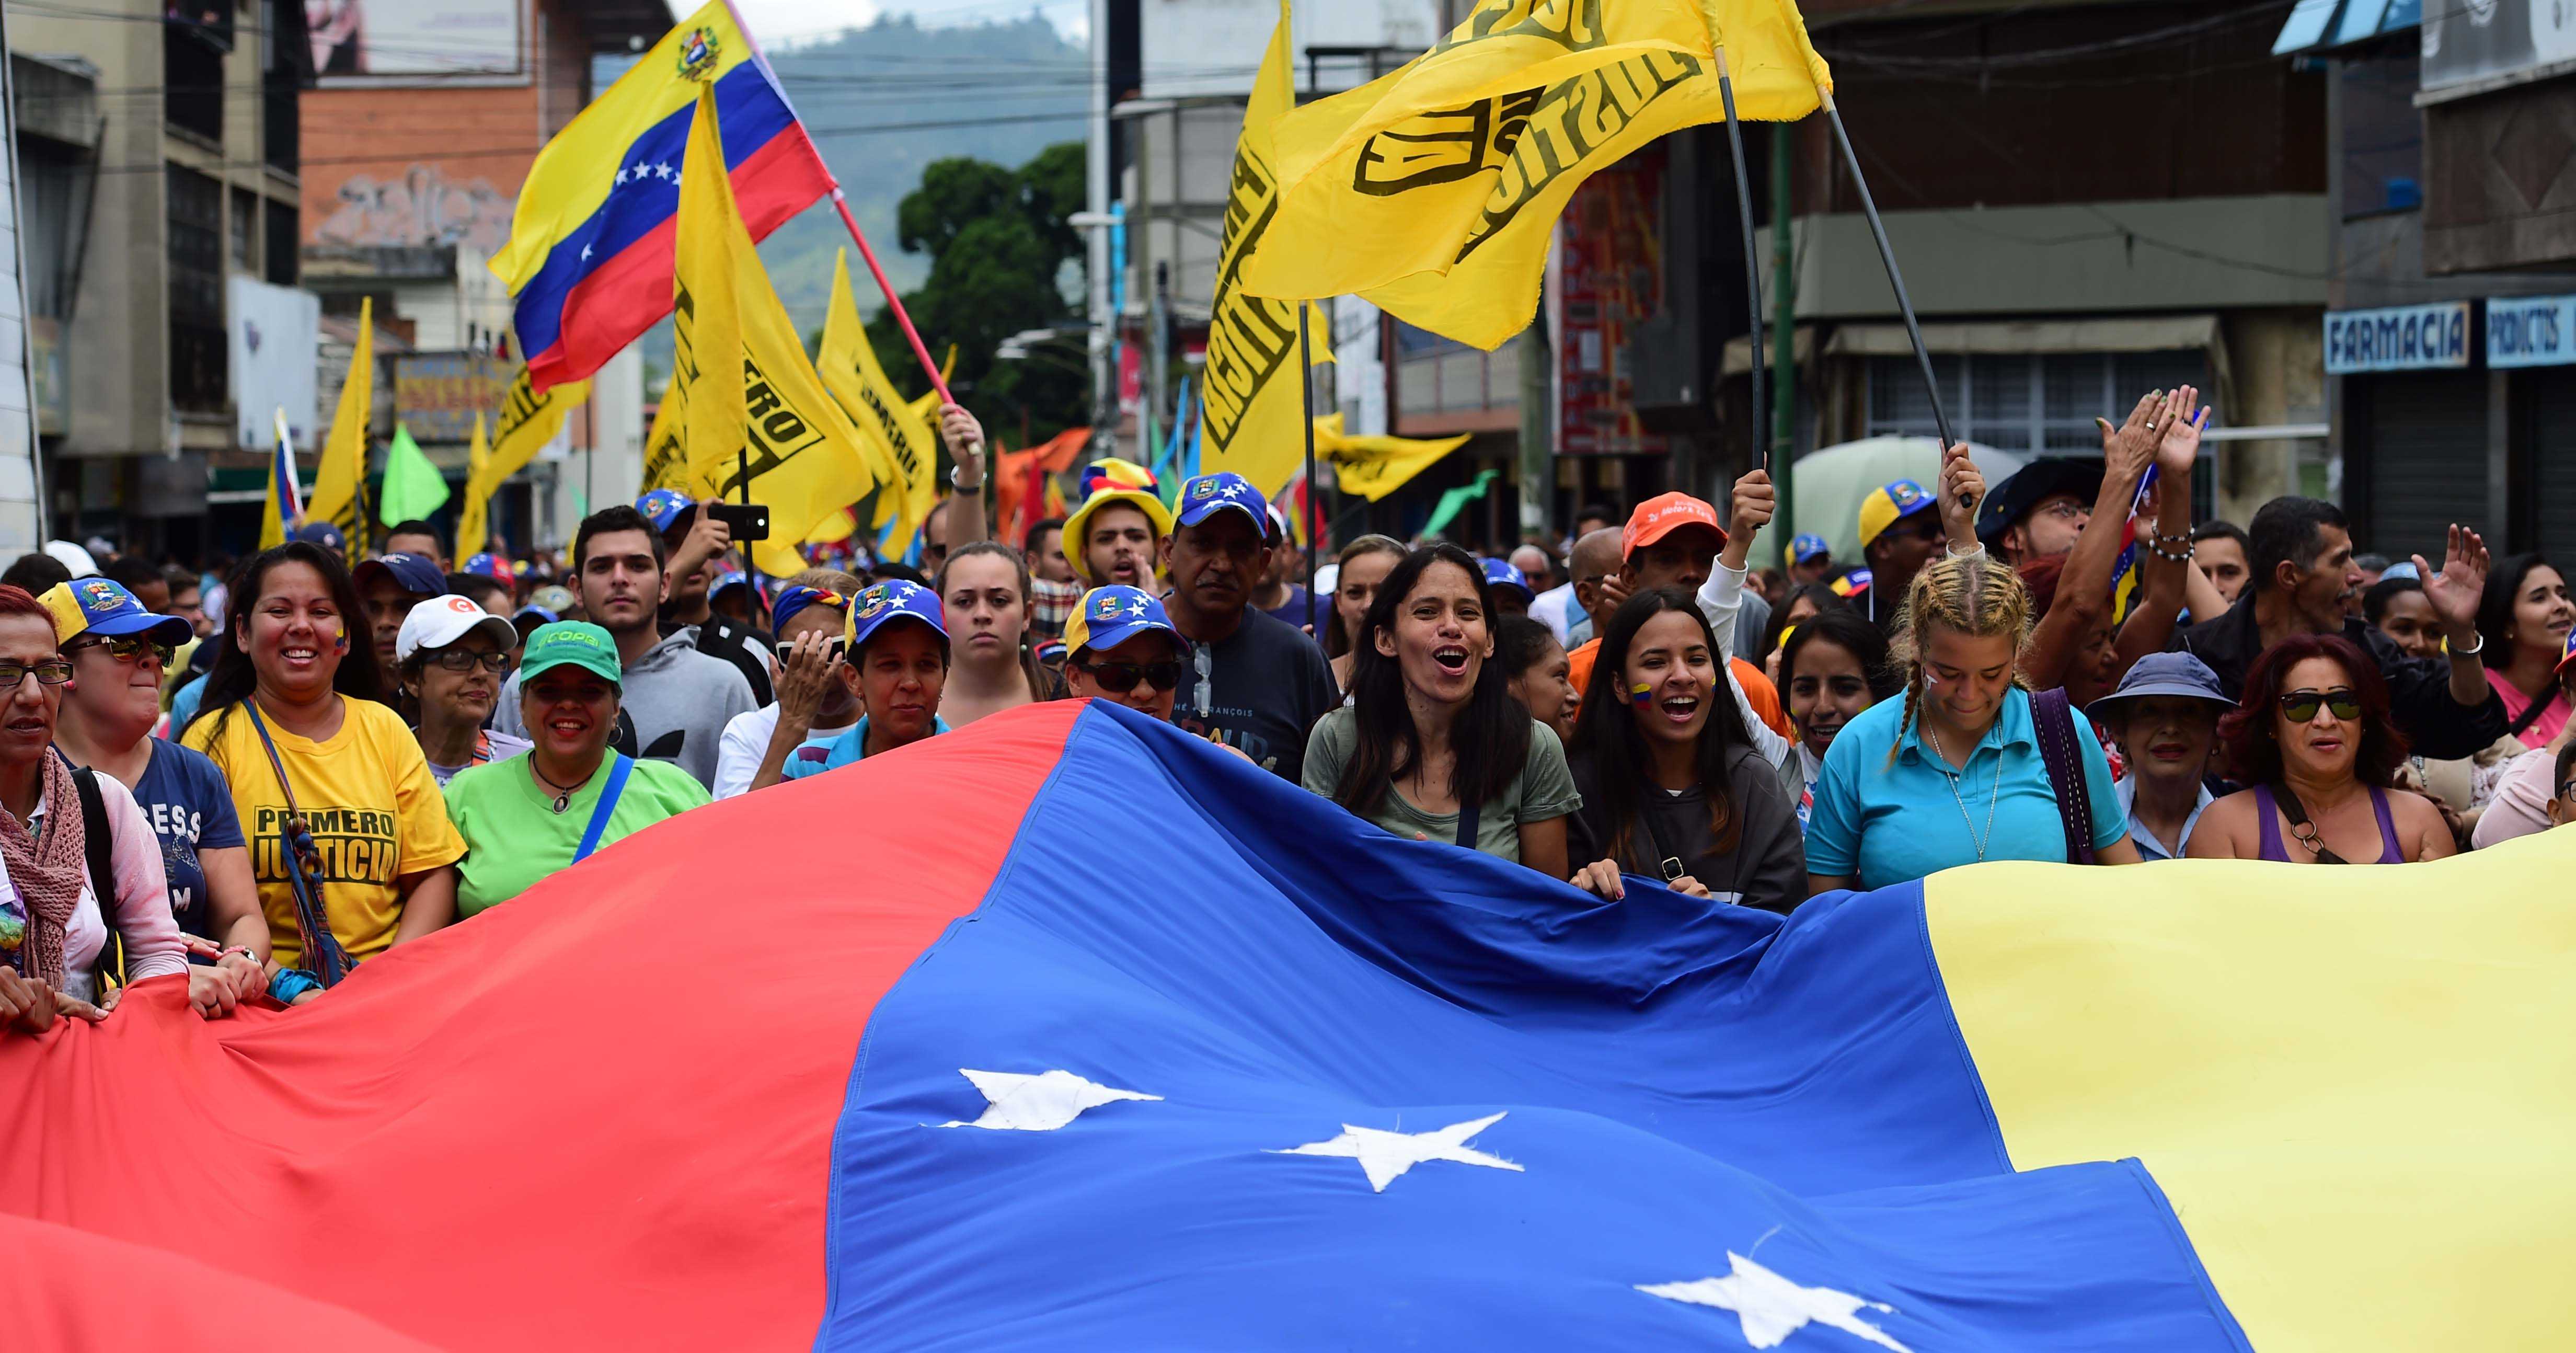 People demonstrate against President Nicolas Maduro, in Los Teques, Miranda State, Venezuela, on September 7, 2016 as the country's opposition called for new nationwide protests to pressure for a referendum on removing him from power by the end of the year. Venezuela's opposition is holding nationwide protests against Maduro, testing his grip on power six days after massive demonstrations showed the magnitude of anger over a raging crisis. / AFP PHOTO / RONALDO SCHEMIDT